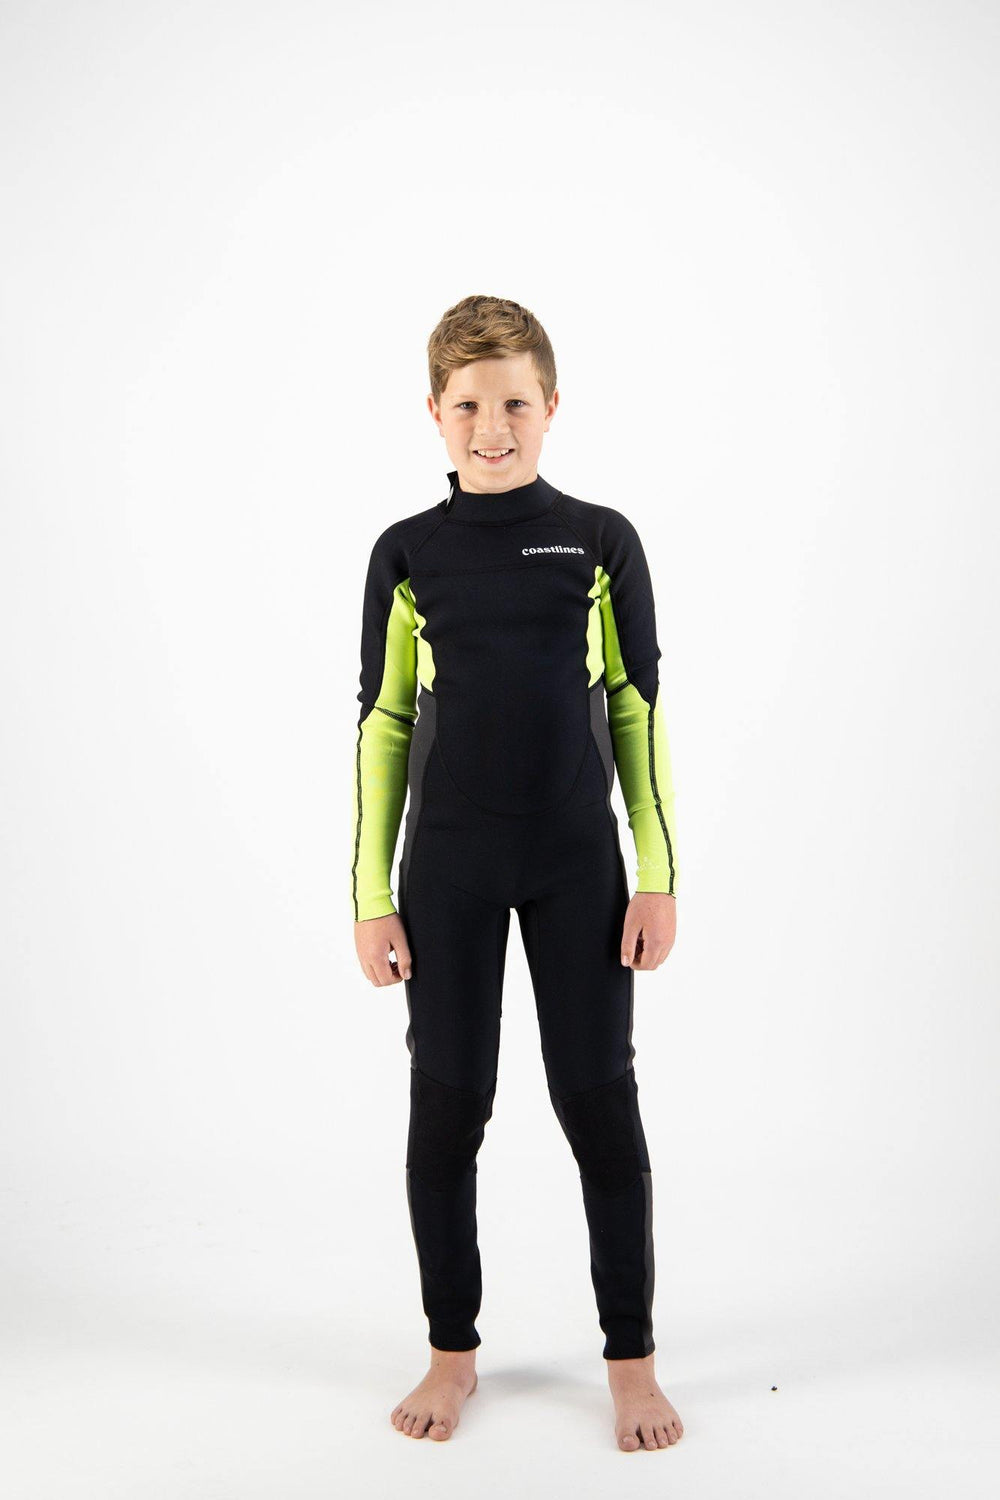 Classic Youth 3/2 Back Zip Steamer - The Surfboard Warehouse NZ